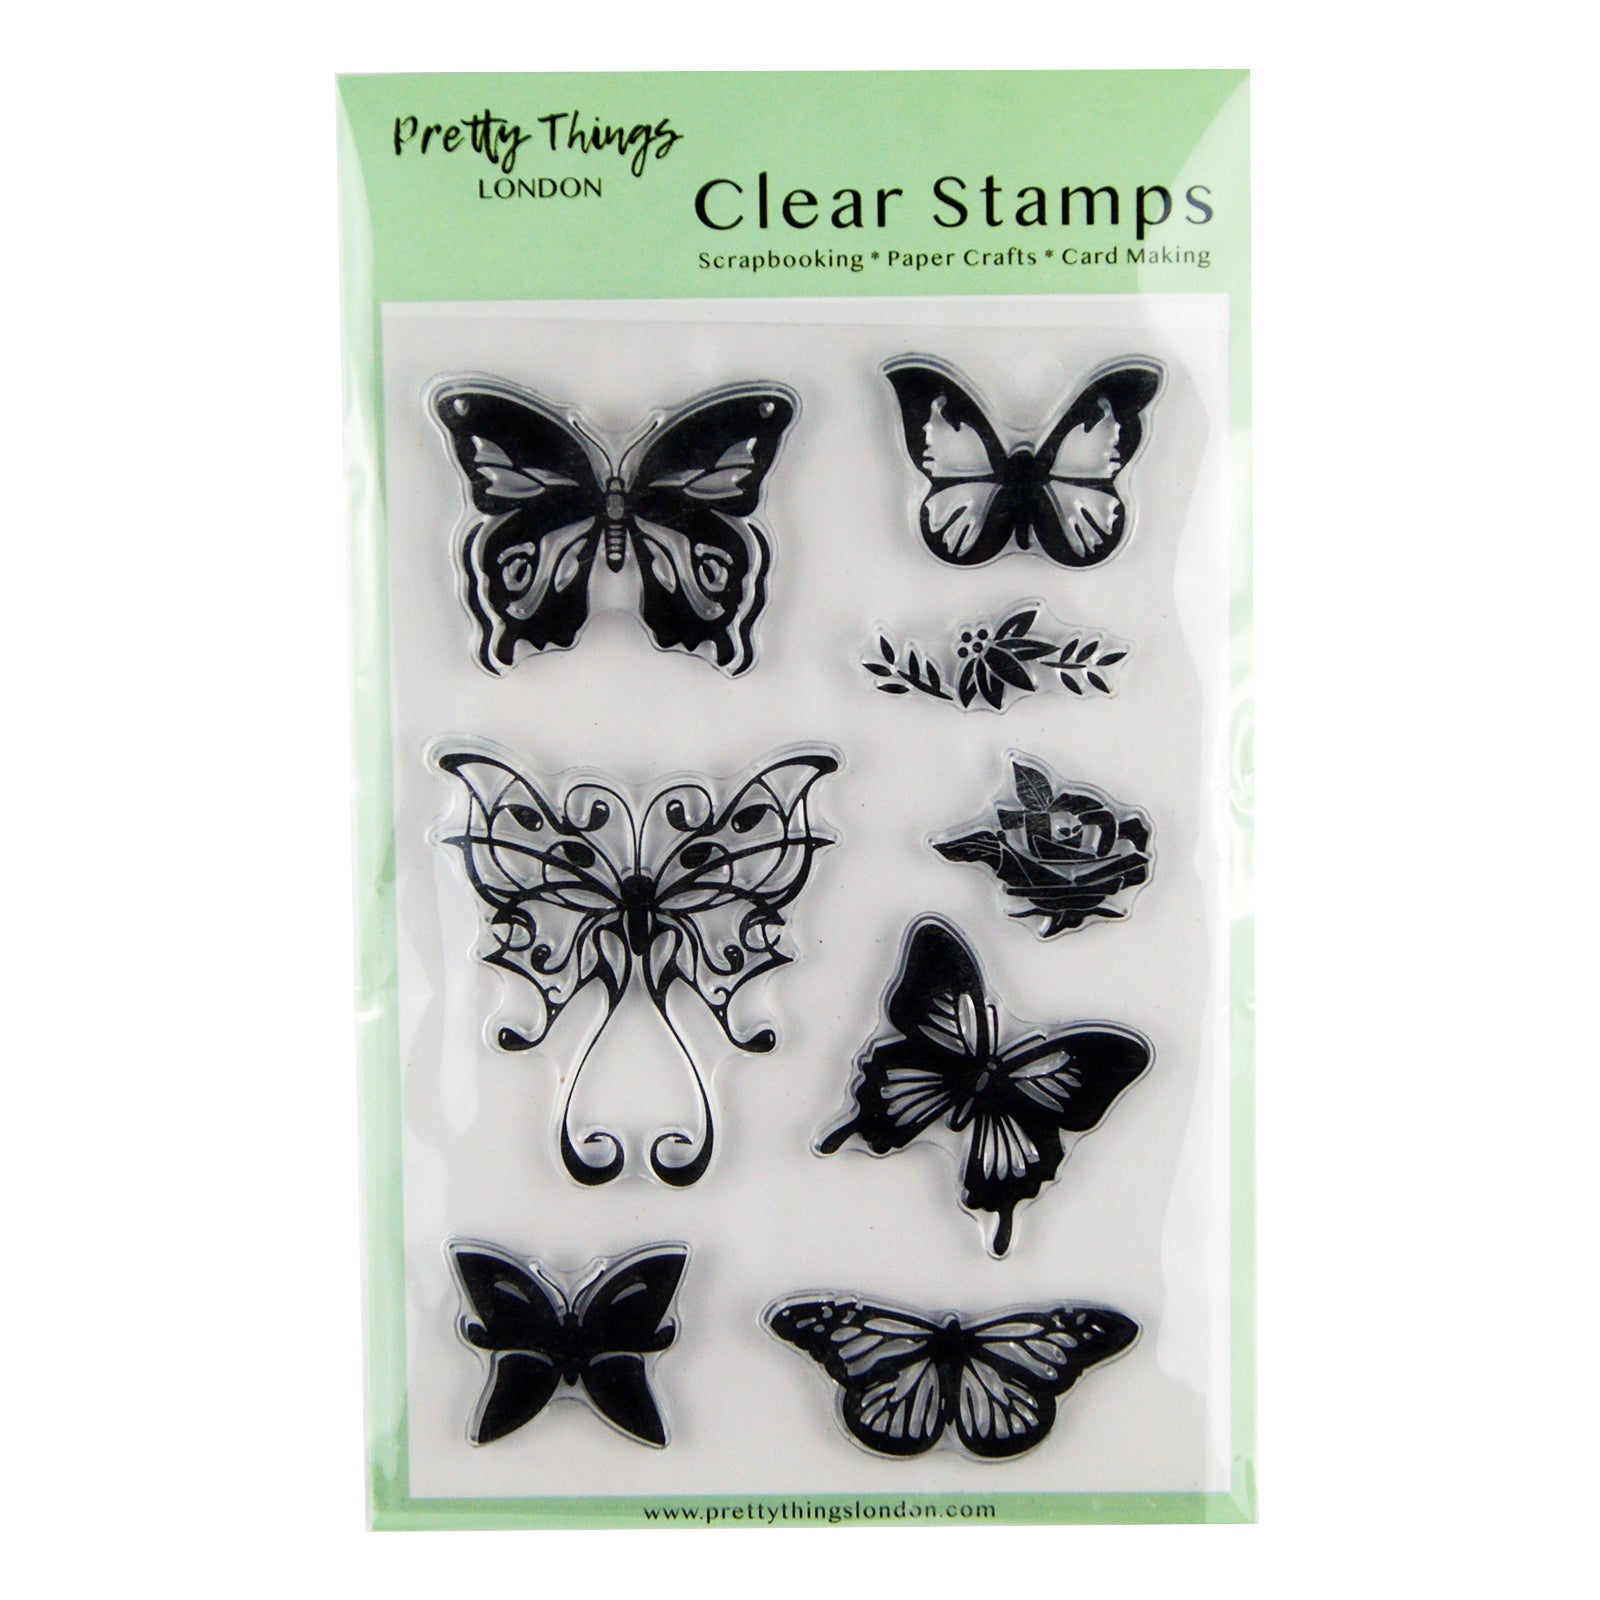 Clear stamps various butterflies and flowers card making and scrapbooking